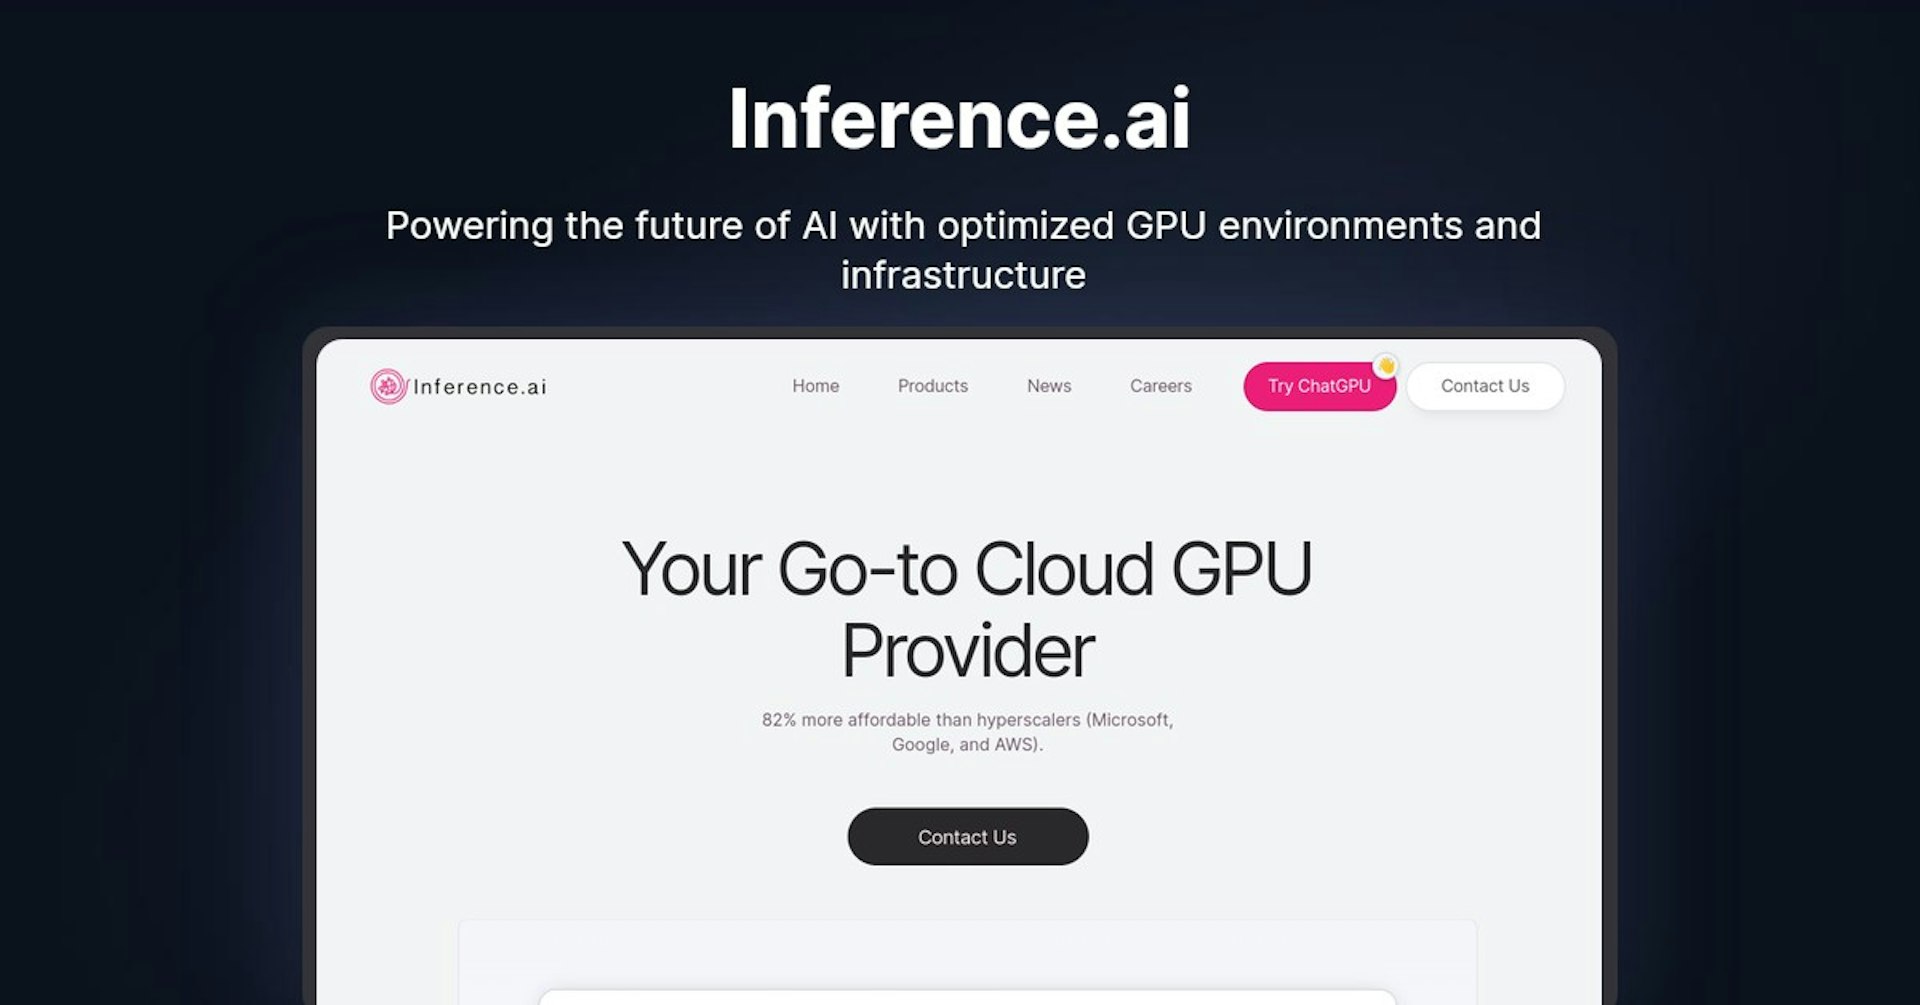 Inference.ai